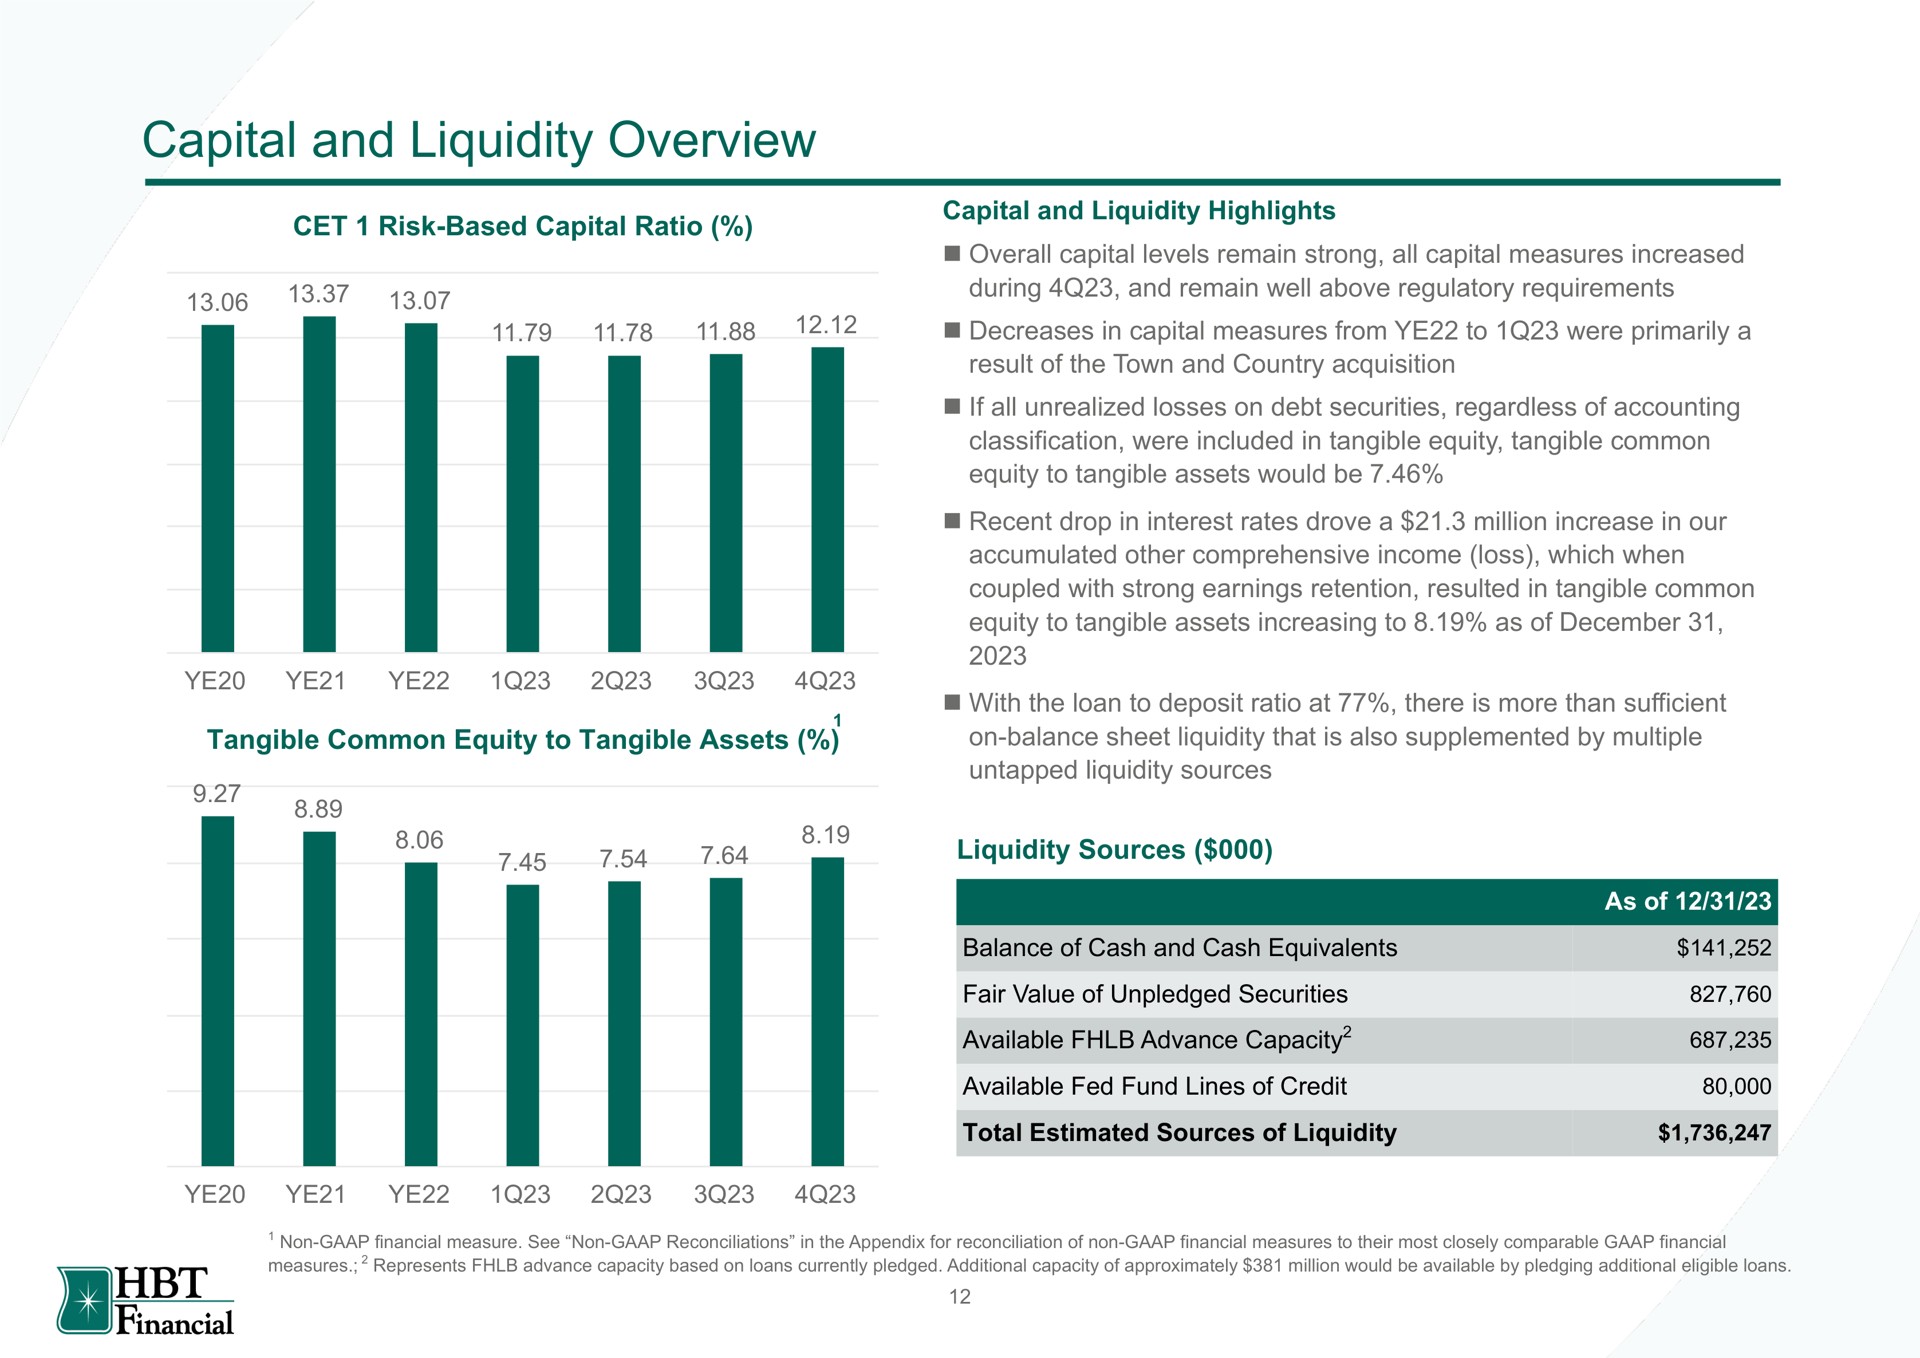 capital and liquidity overview financial | HBT Financial